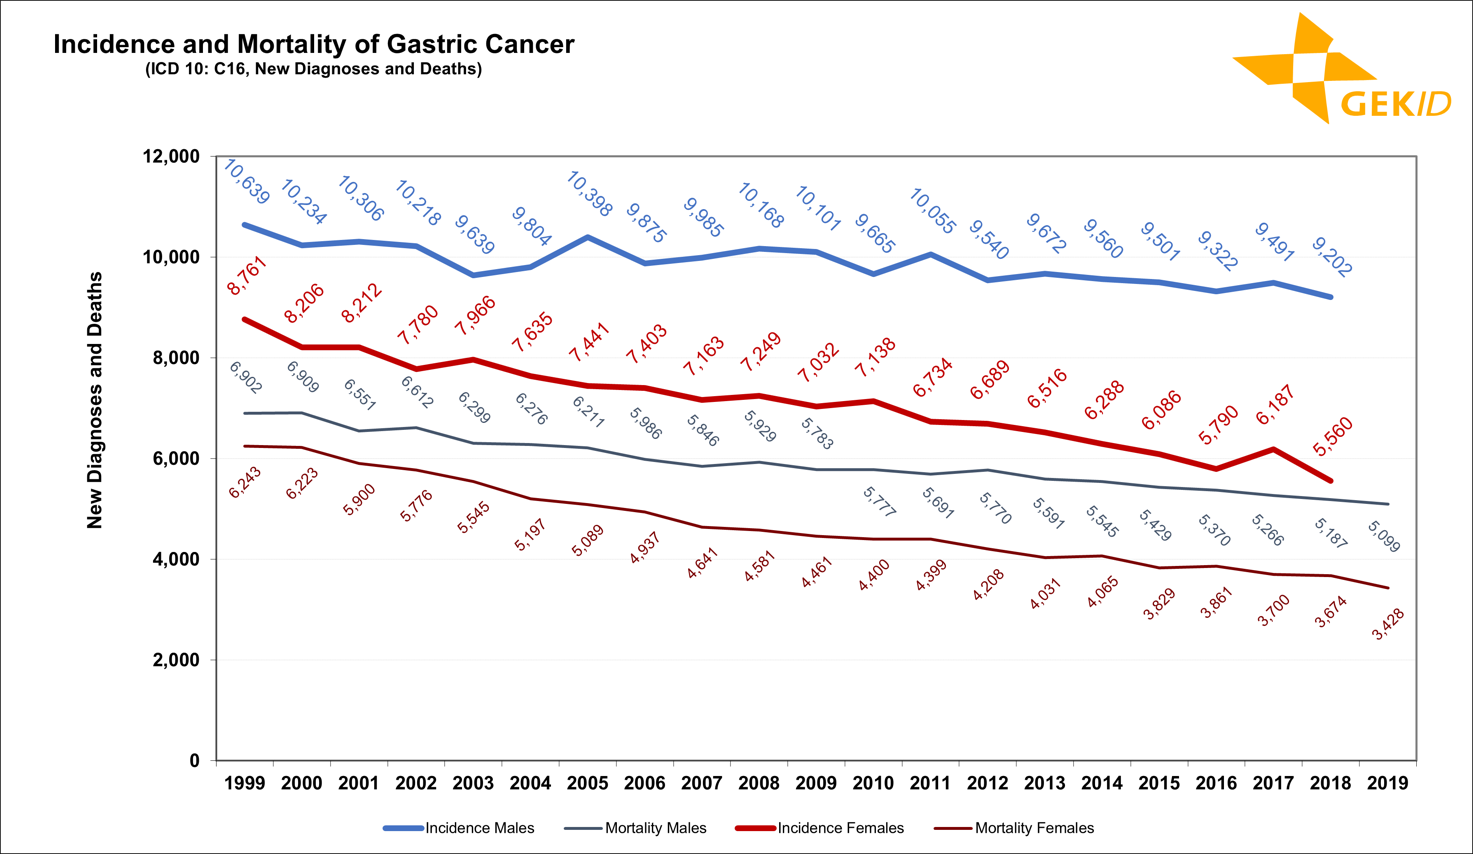 Estimated incidence and mortality of gastric cancer (ICD 10: C16) in Germany - number of cases 1